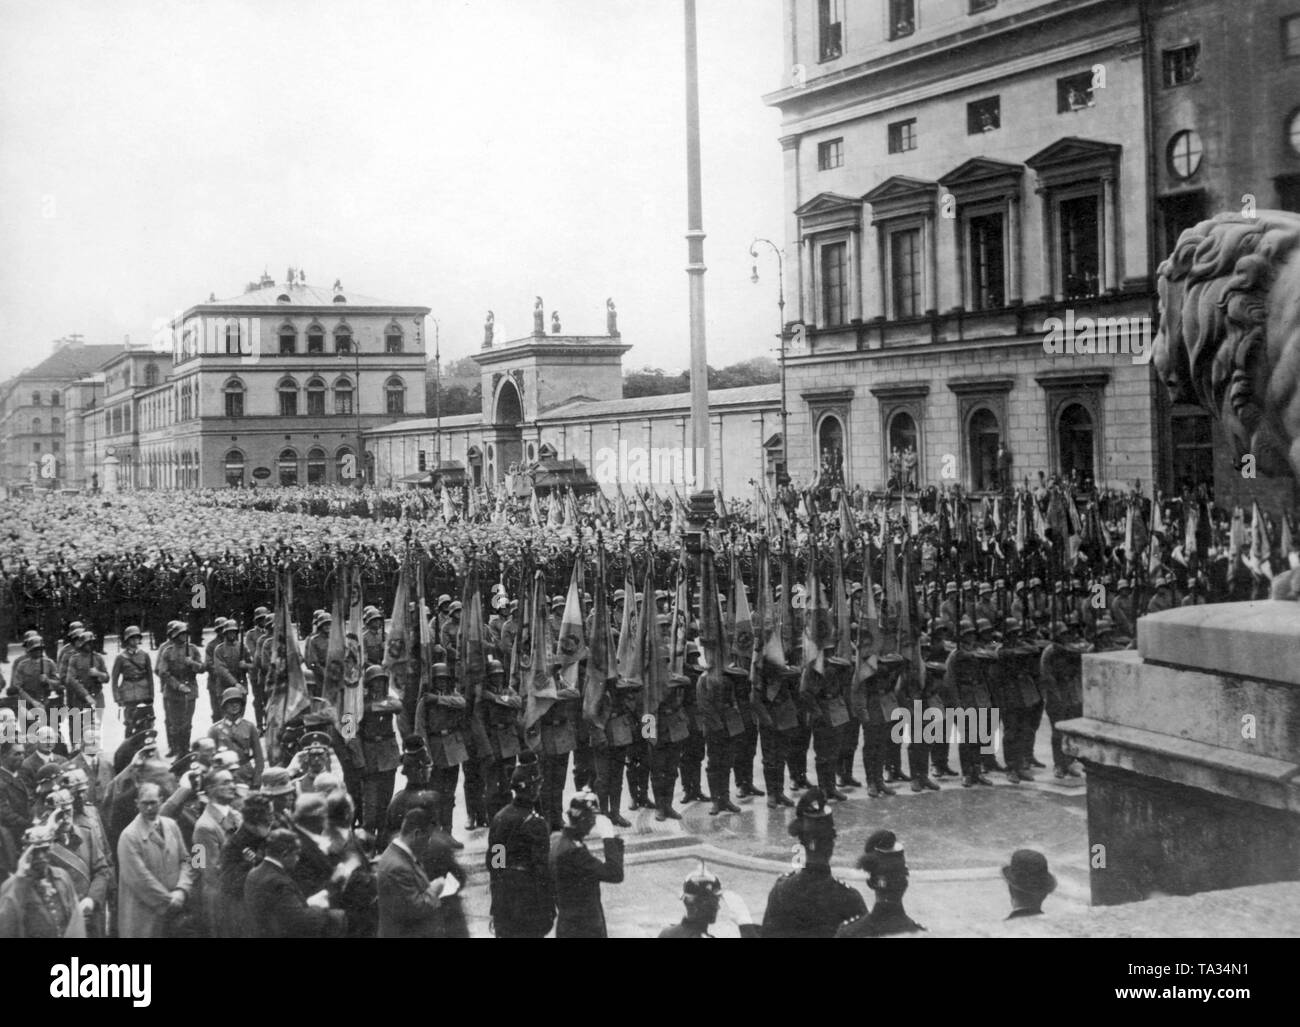 On the 75th birthday of the well-known Bavarian military leader, Colonel-General Felix Ludwig, Graf von Bothmer, at the Feldherrnhalle in Munich are consecrated  two commemorative plaques for the fallen of the Bavarian Army in the First World War and the glories of the Bavarian Army in general. The celebration is attended by the heads of state and city authorities. The ceremony is attended by Crown Prince Rupprecht and the heads of state and city authorities. In the picture, the Reichswehr Honor Company with the flags of the old army. Behind a vast crowd. Stock Photo